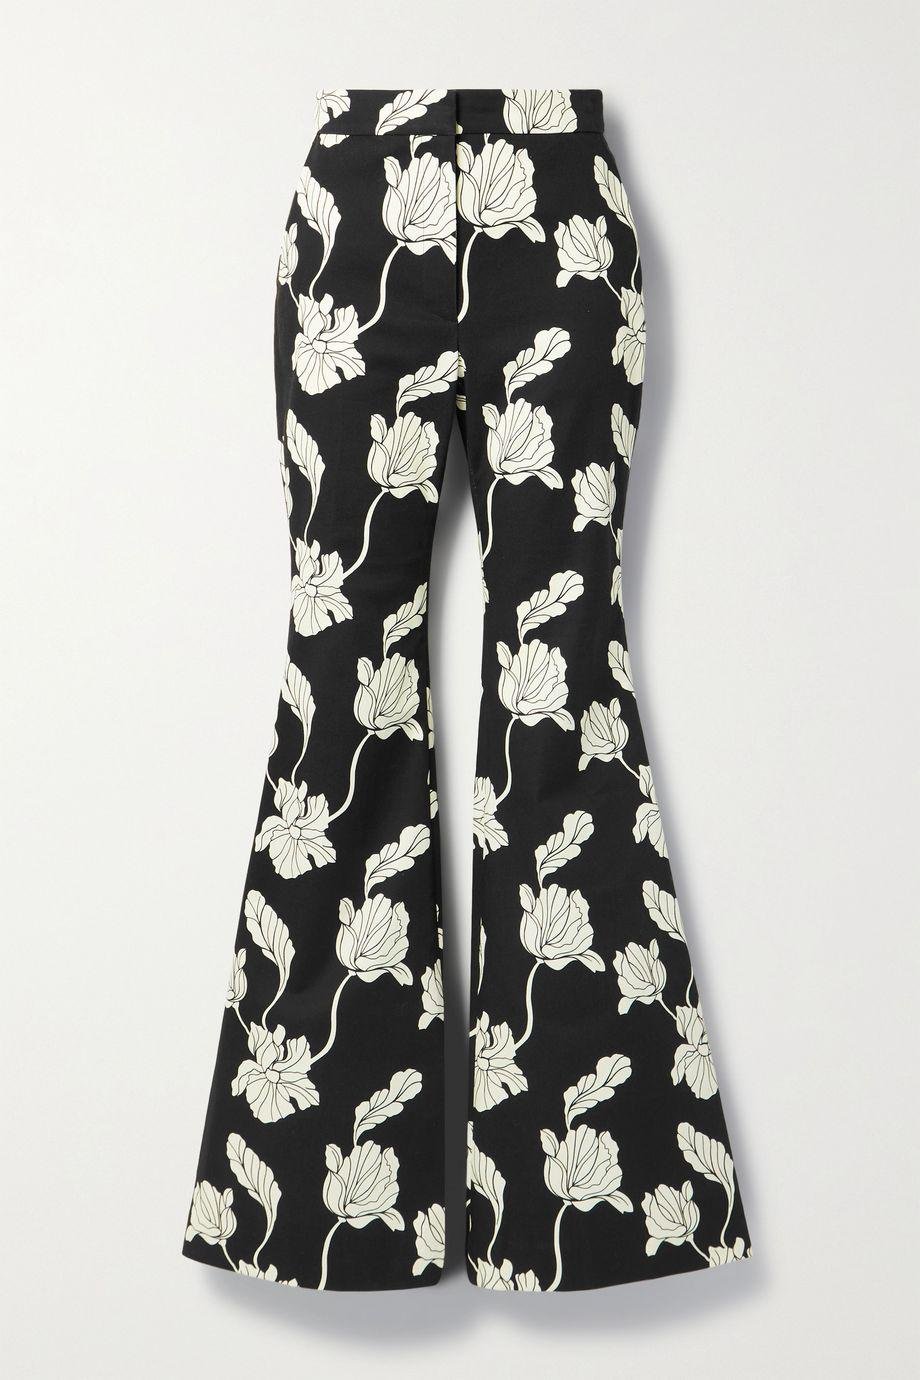 Printed cotton-blend twill flared pants by ADAM LIPPES